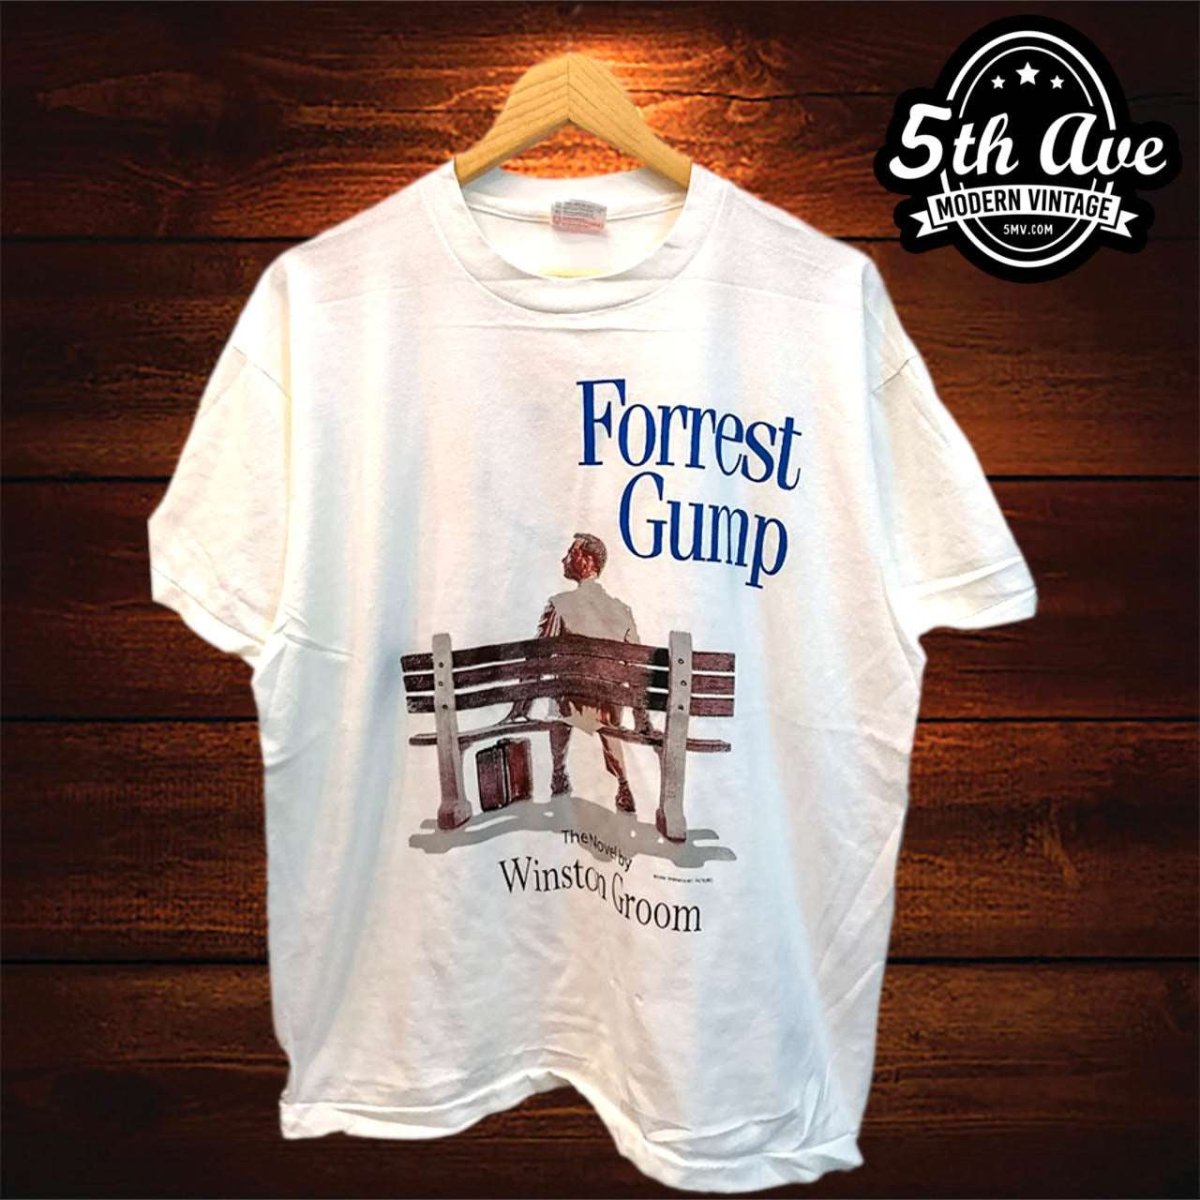 Run with Forrest Gump in Style: Get Our Single Stitch Forrest Gump Movie t shirt - Vintage Band Shirts